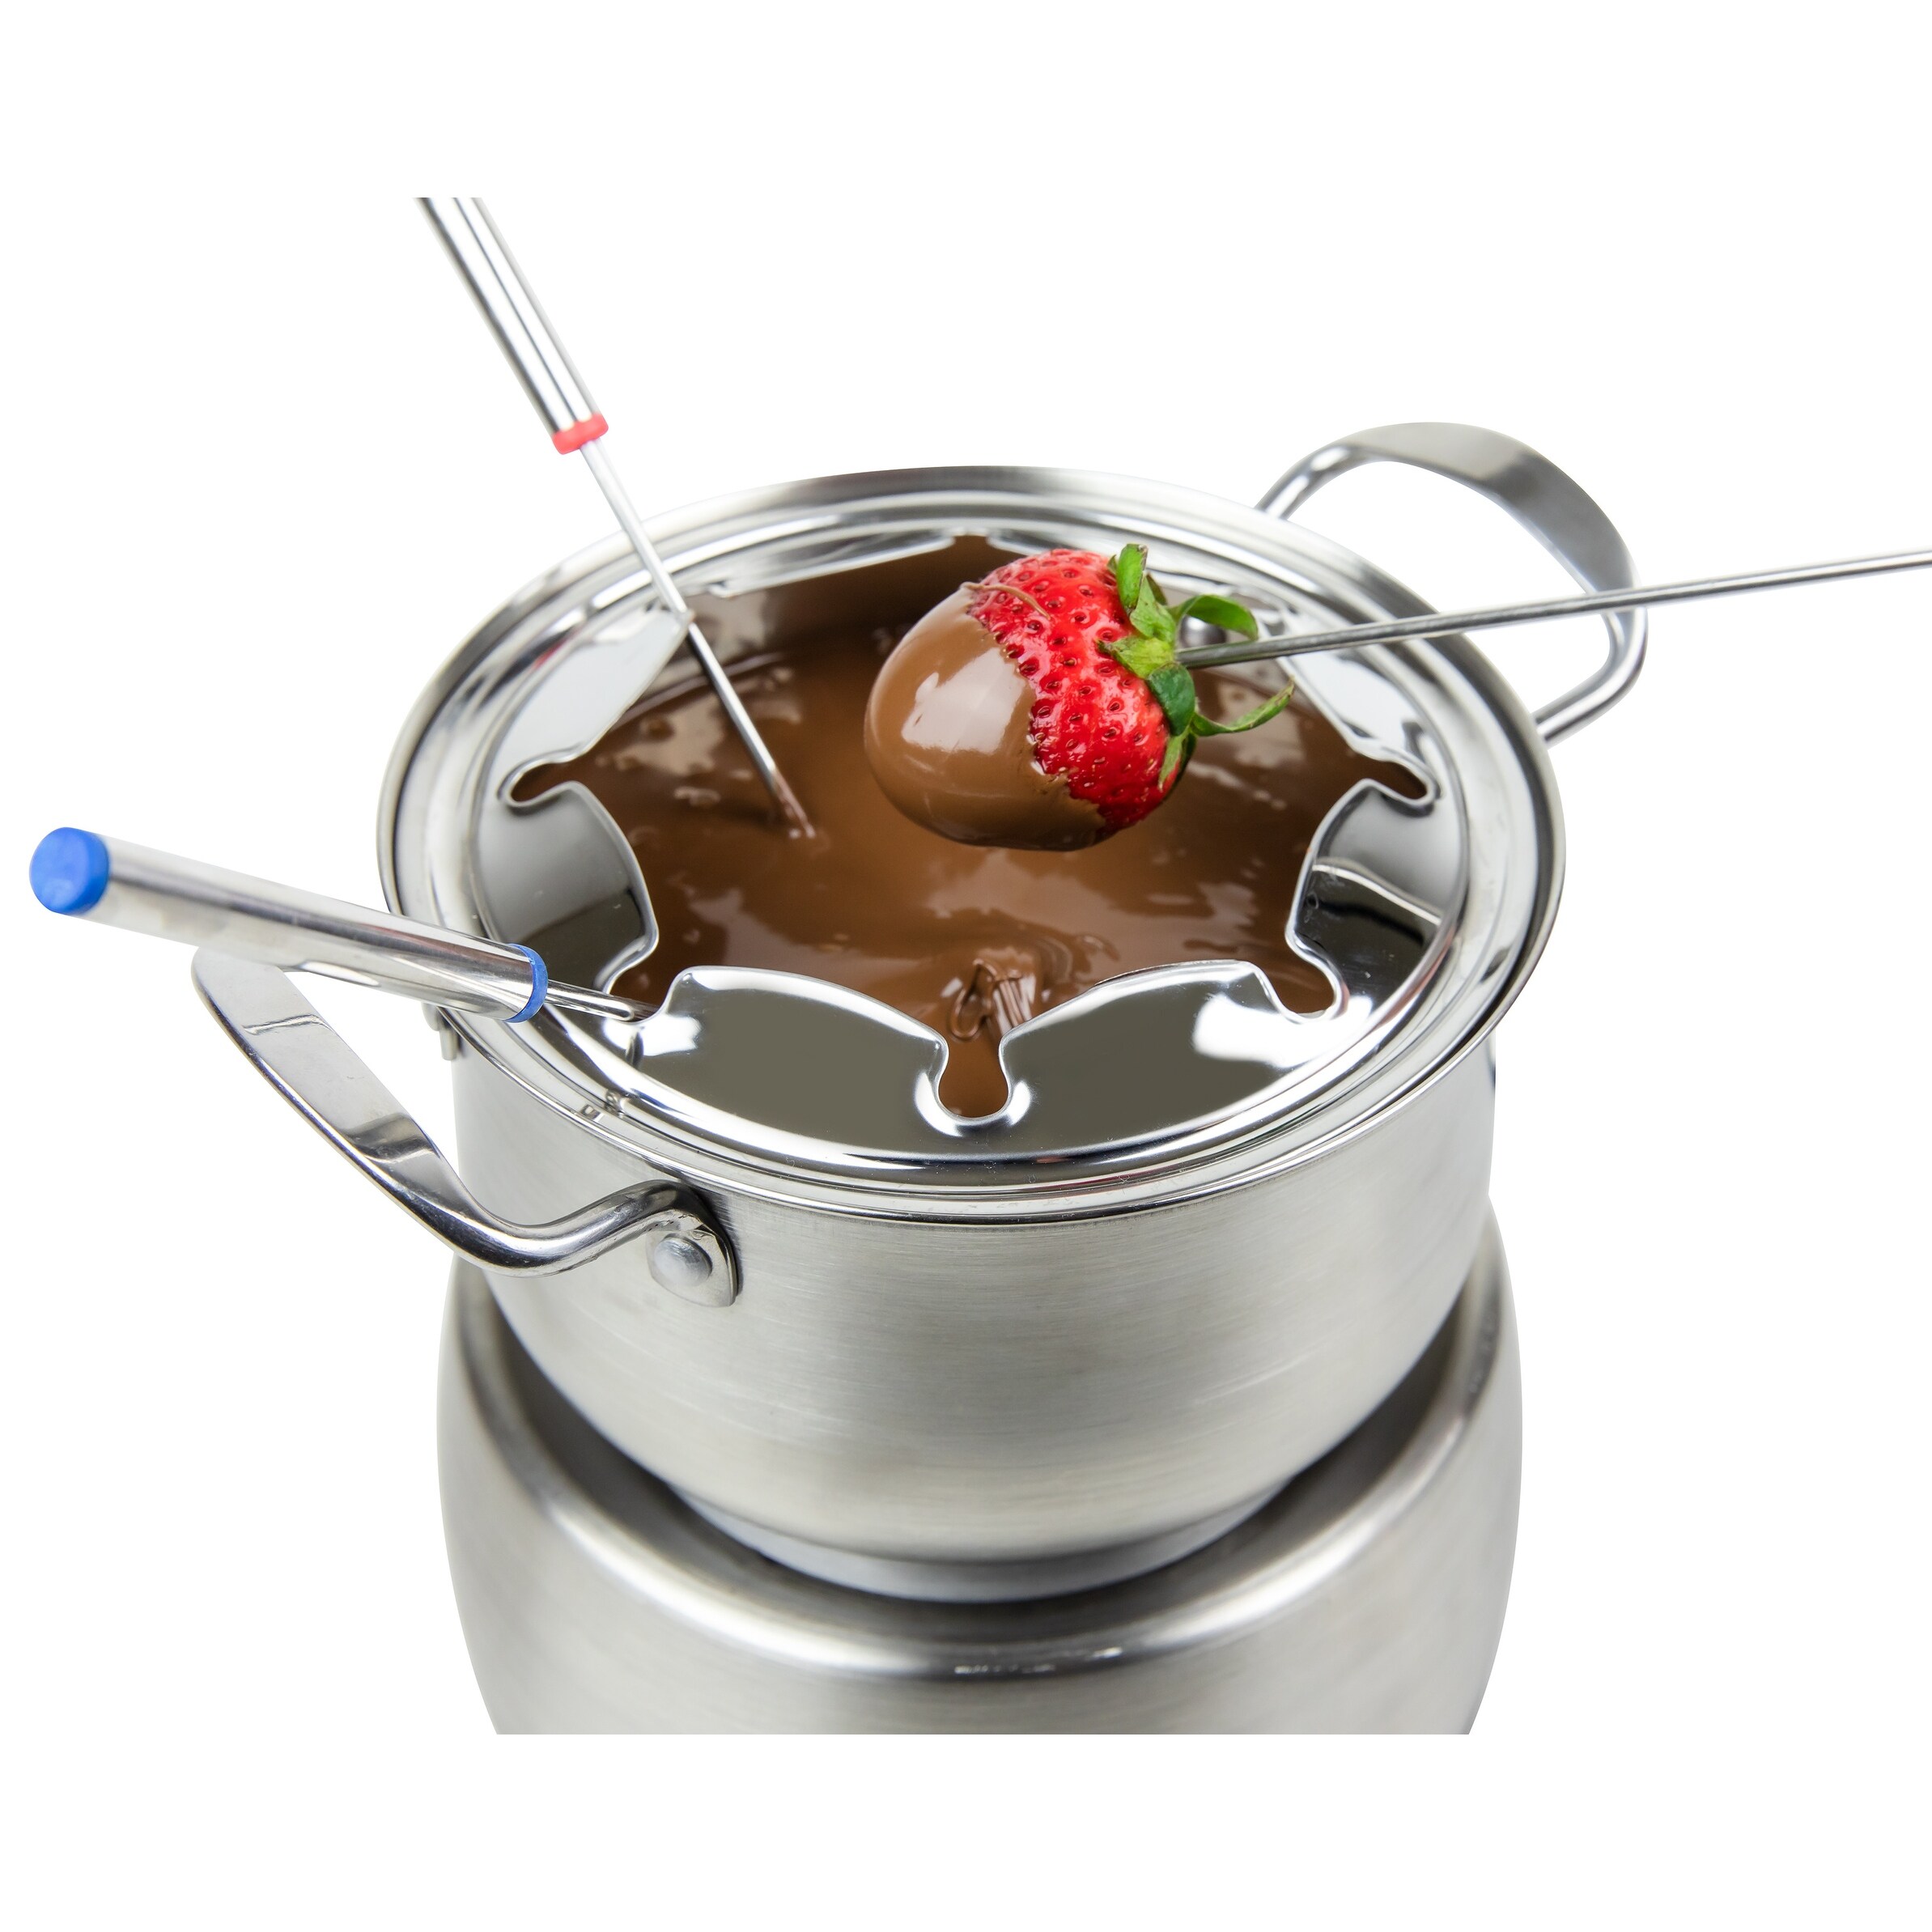 https://ak1.ostkcdn.com/images/products/is/images/direct/1c3bd6be7e1627ffdad2b6a11e8e9b9811b4e97b/HomeCraft-HCFP8SS-8-Cup-Electric-Fondue-Set.jpg